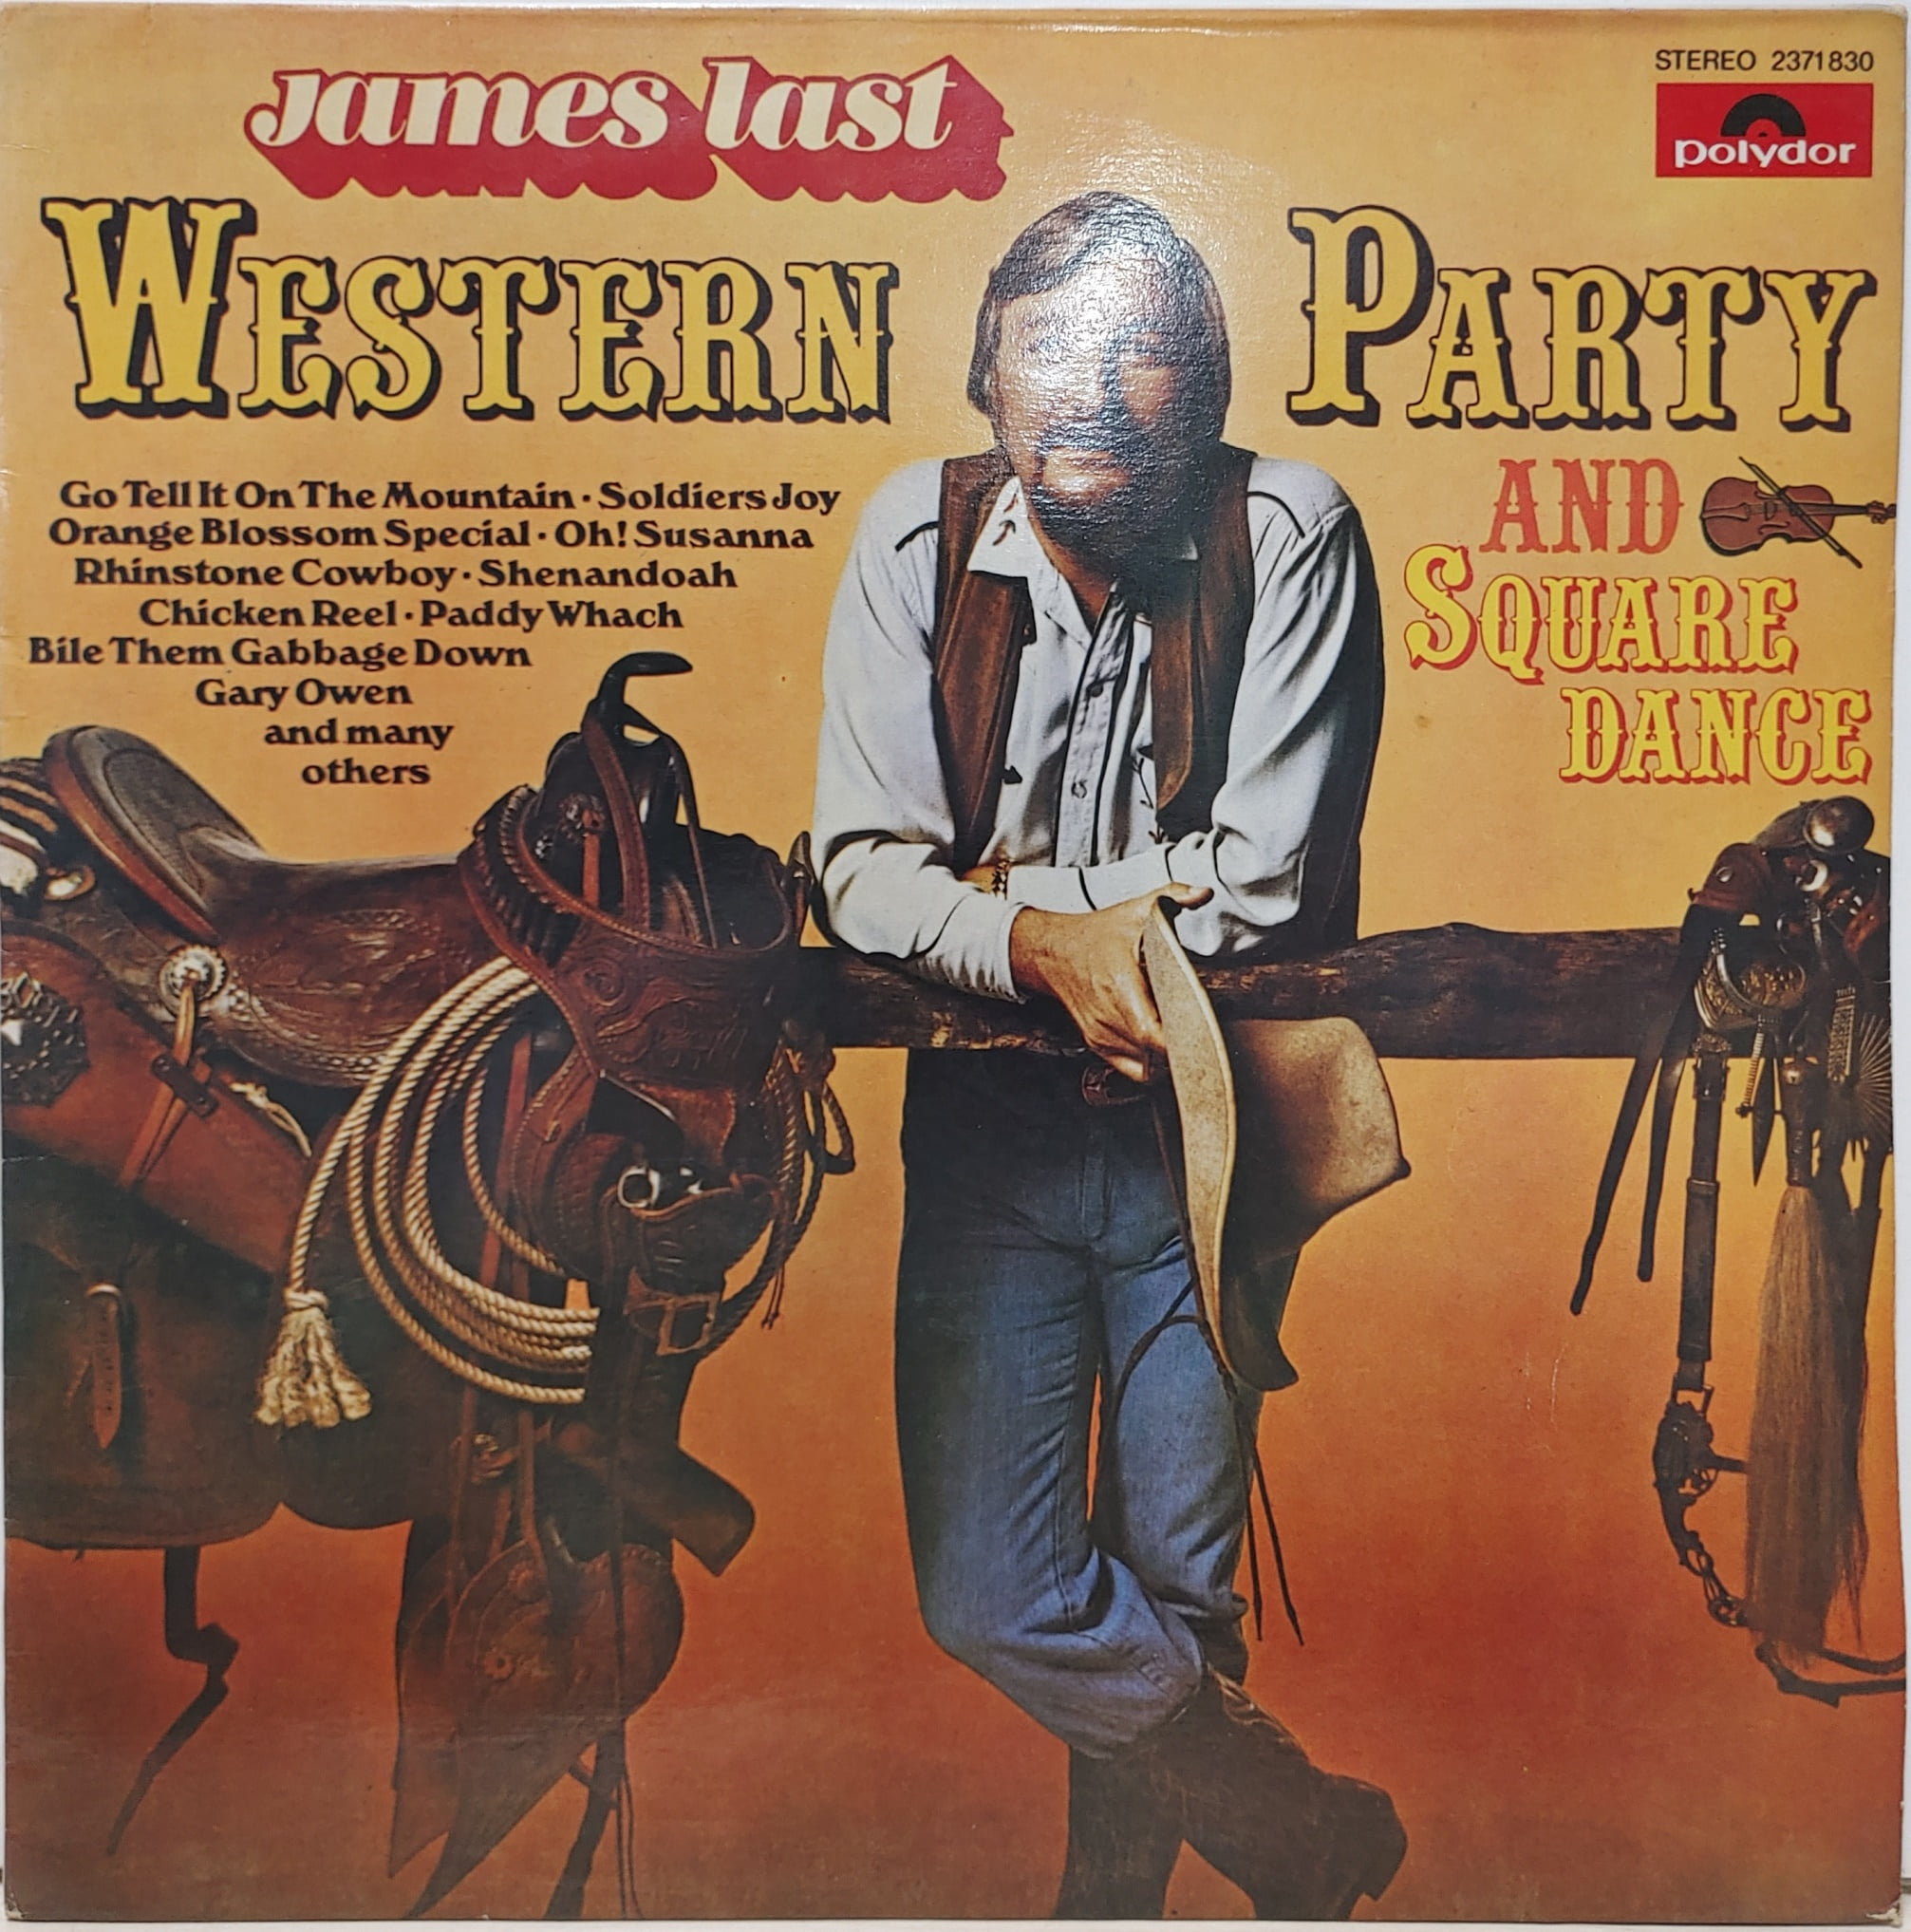 JAMES LAST / WESTERN PARTY AND SQUARE DANCE